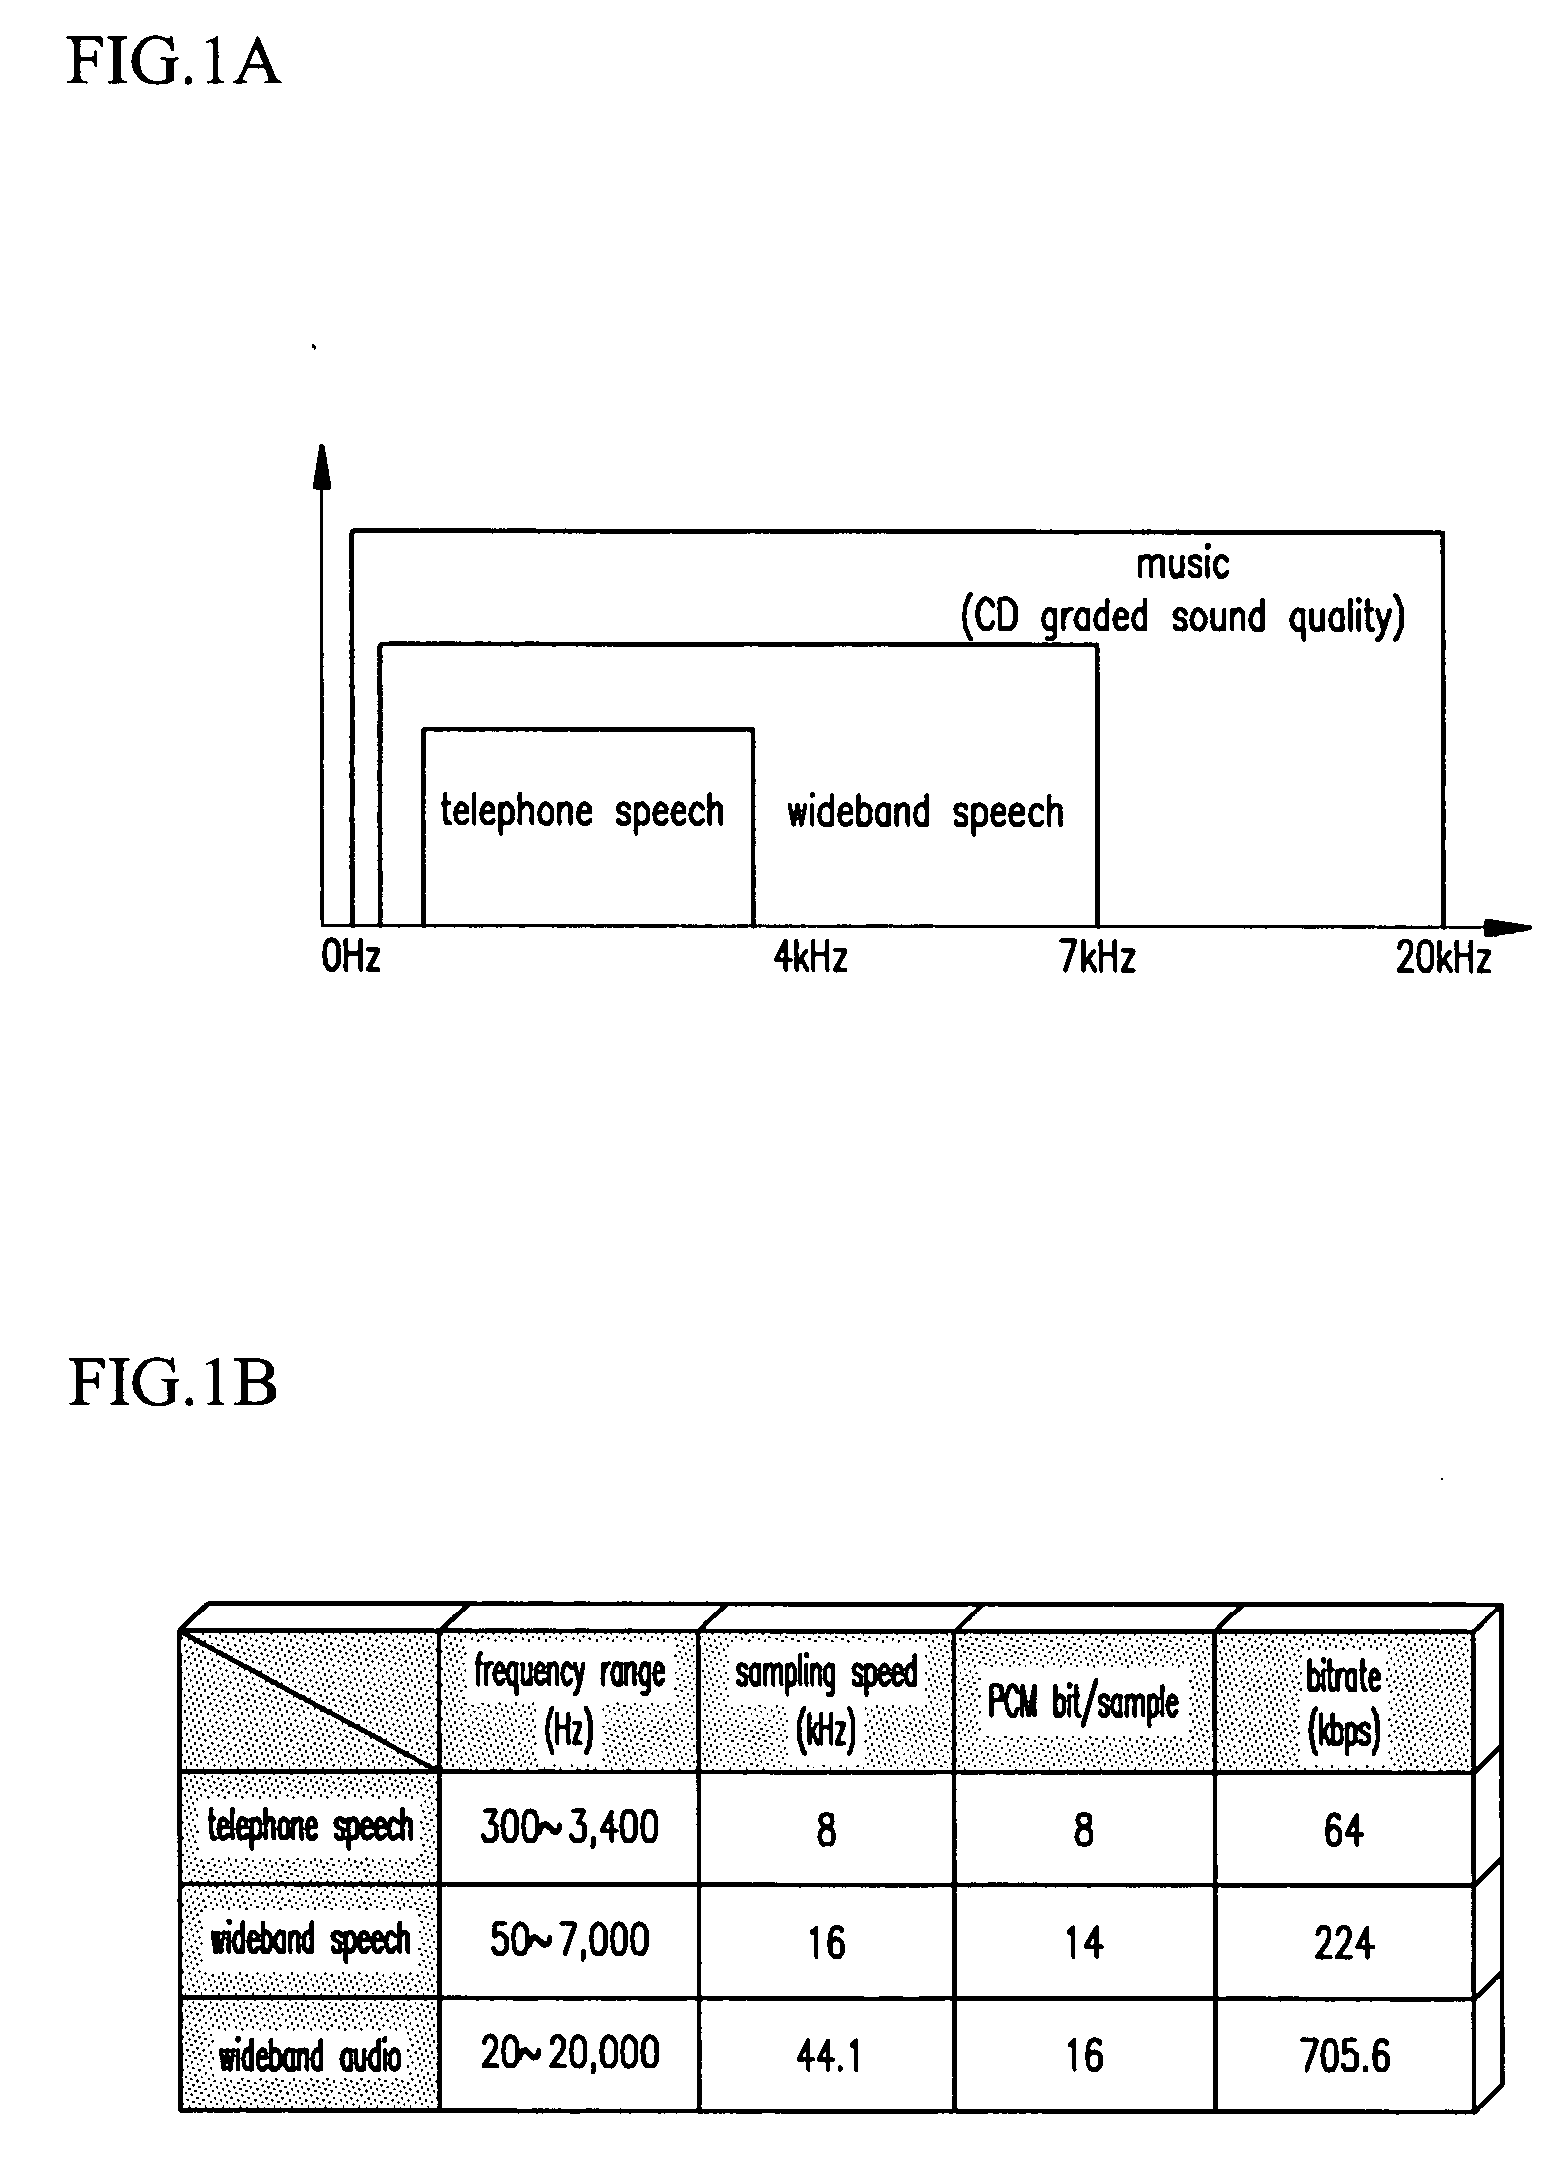 Apparatus for coding of variable bitrate wideband speech and audio signals, and a method thereof